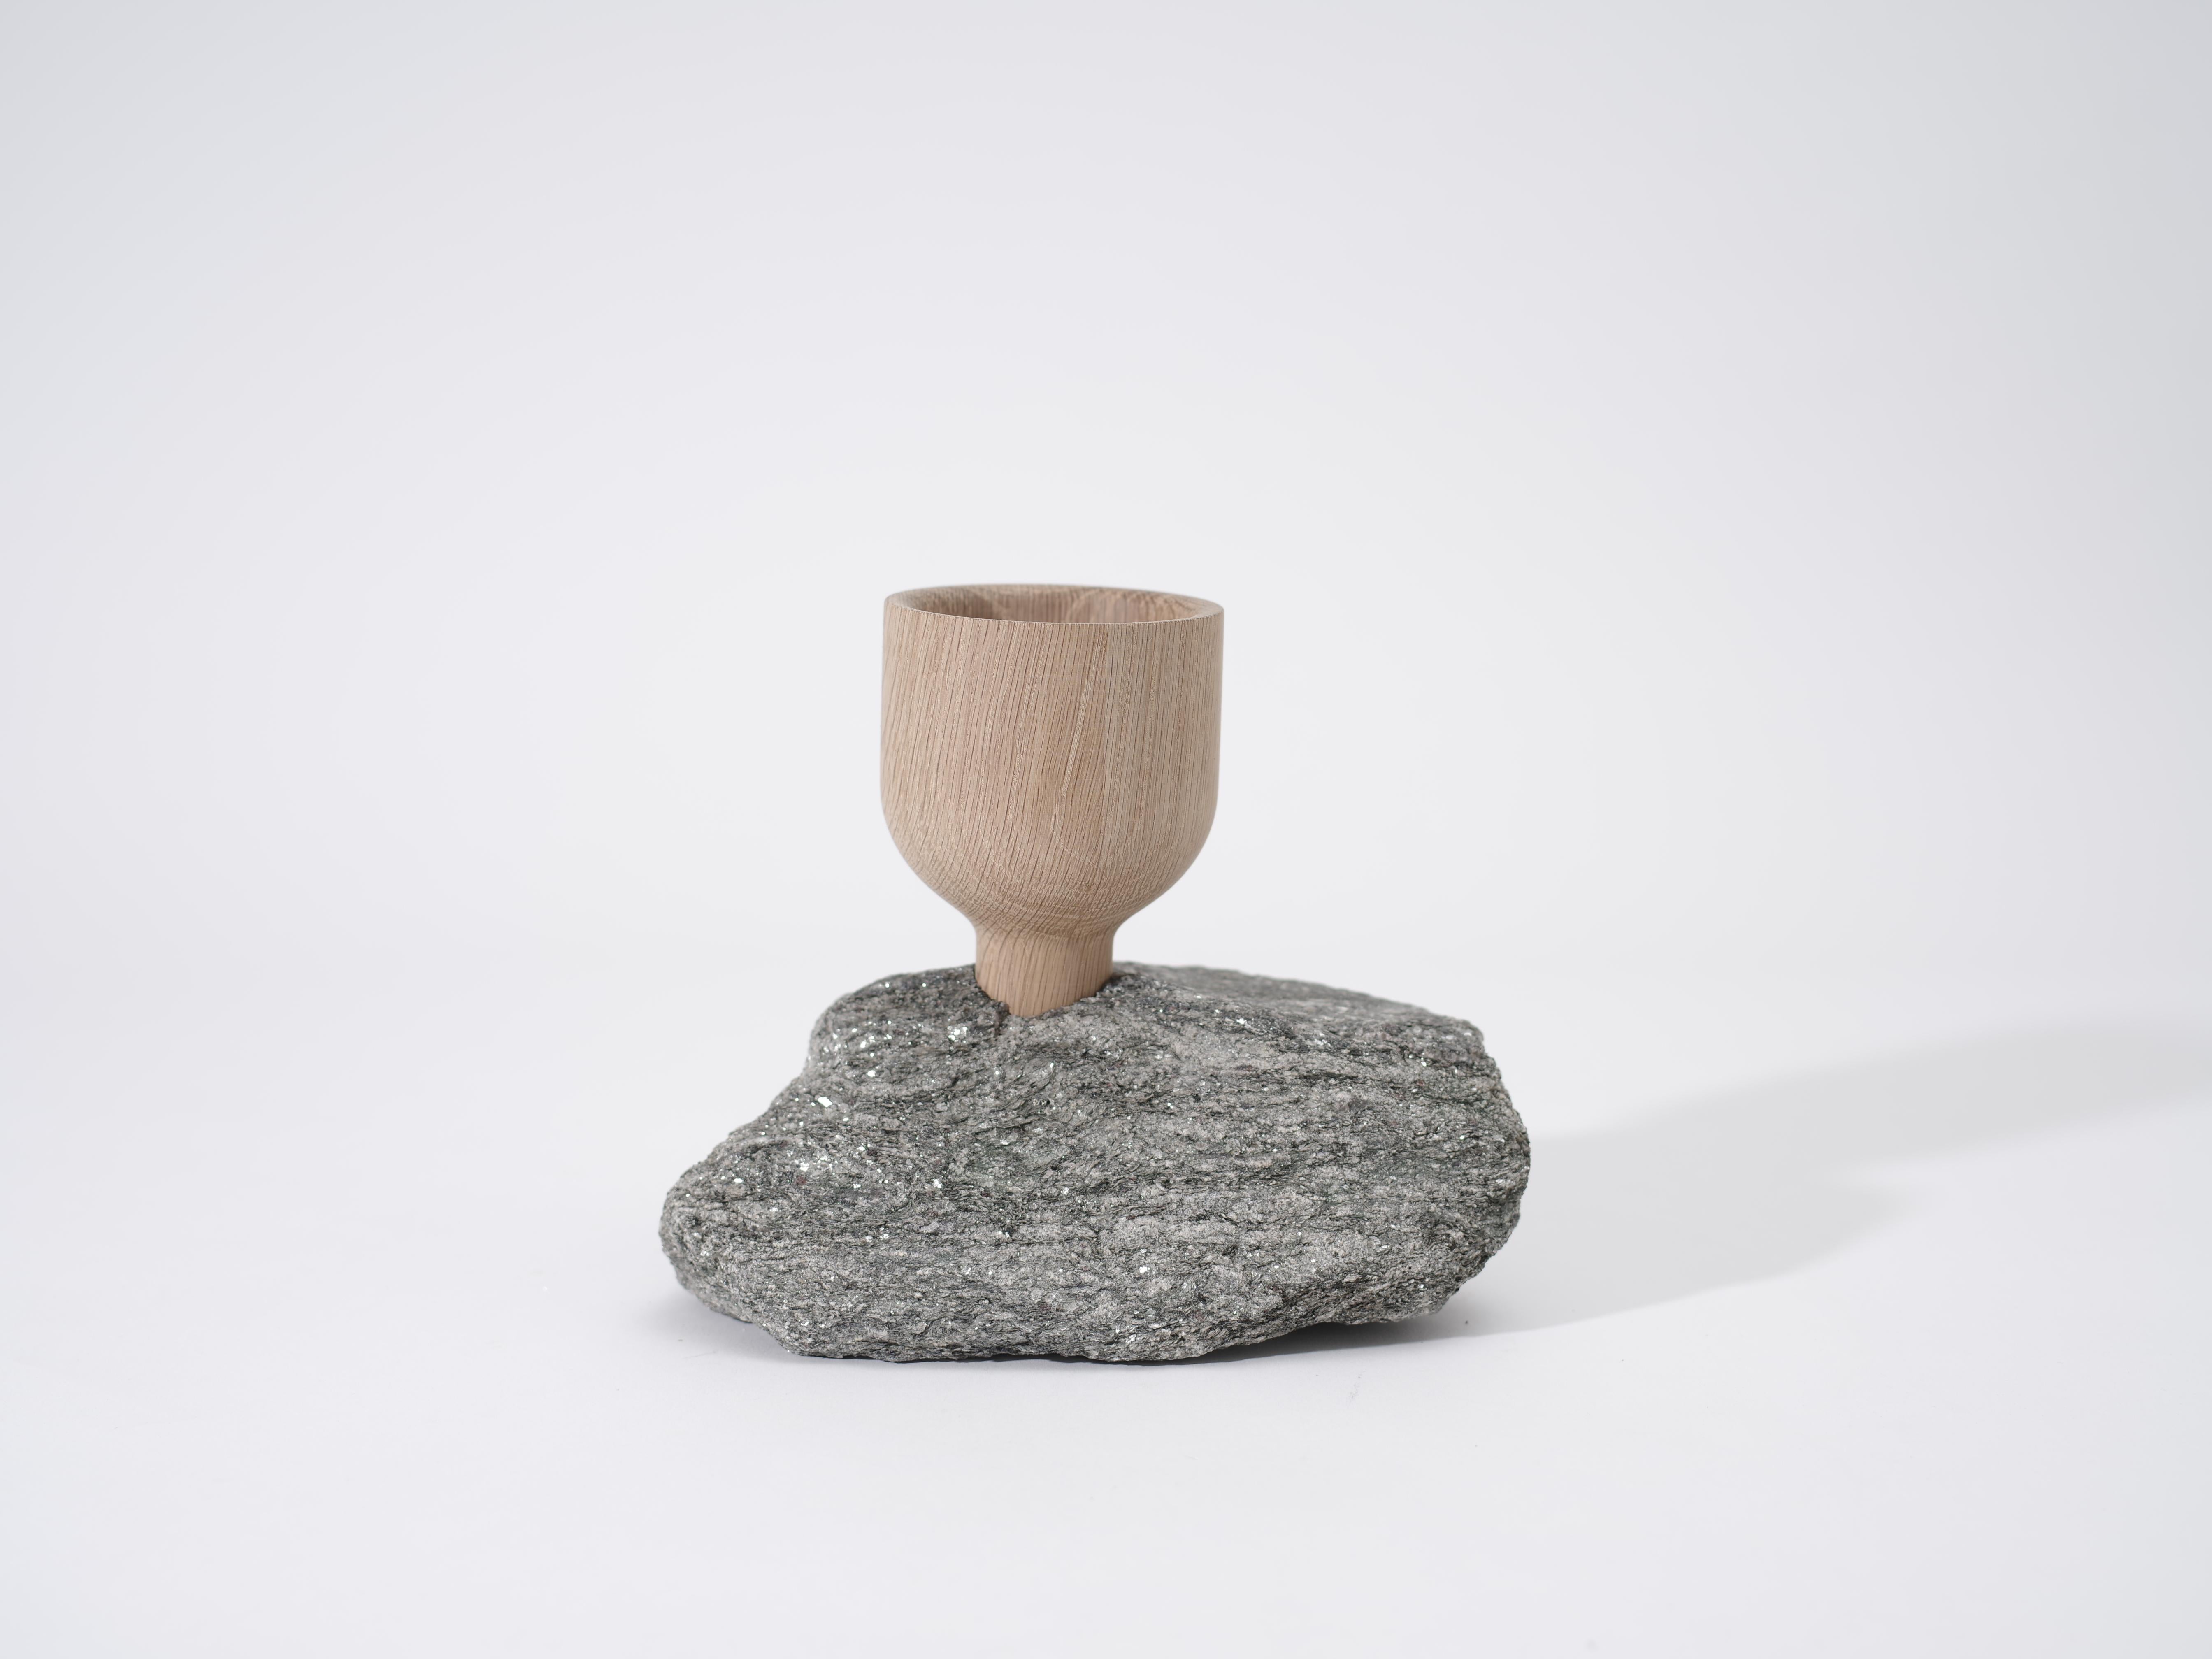 American Rock Cup, Sculptural Object by Pat Kim